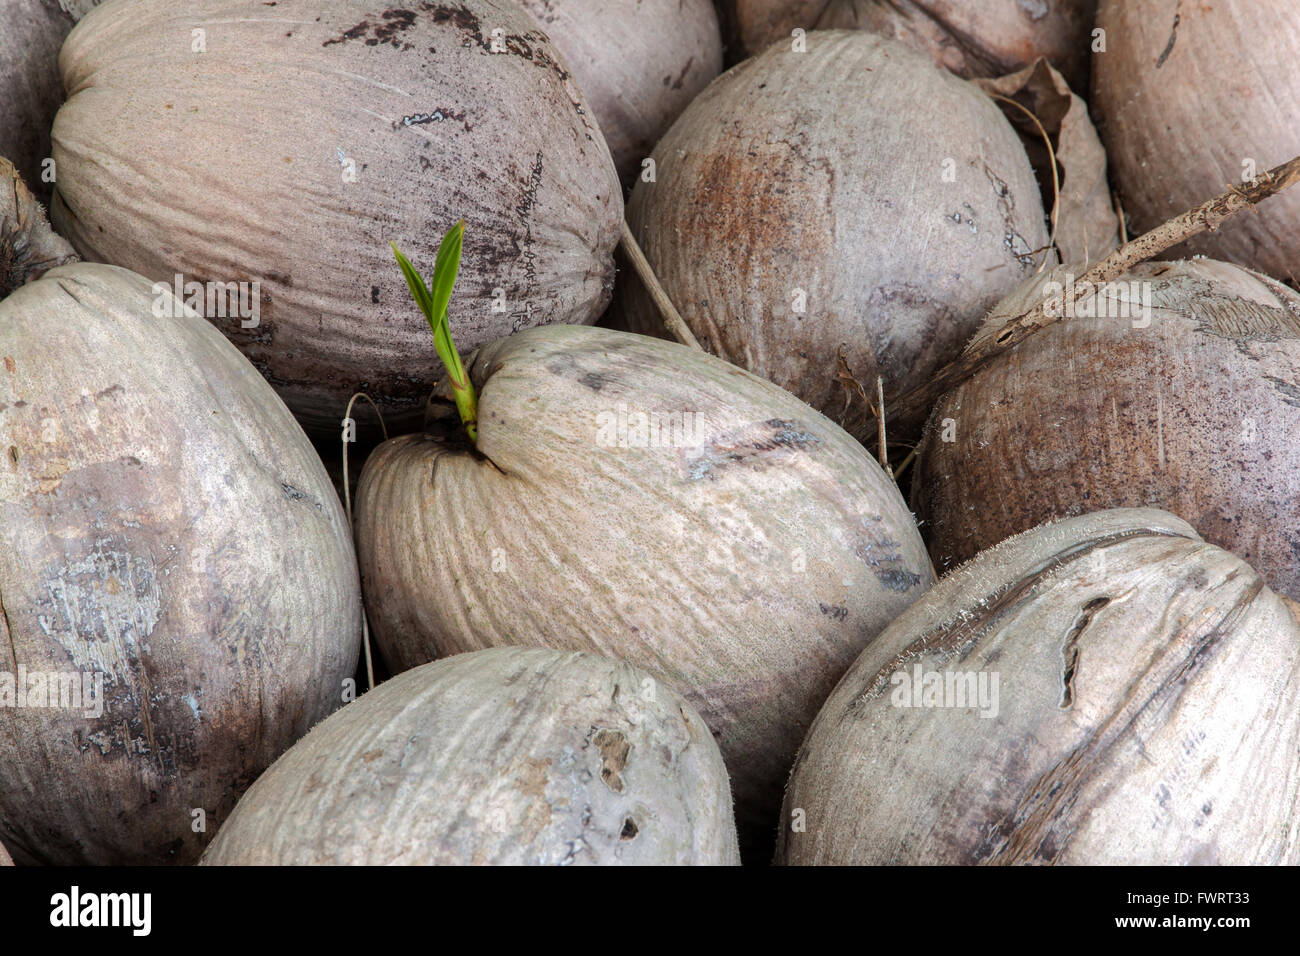 The germination in piled coconut. Stock Photo